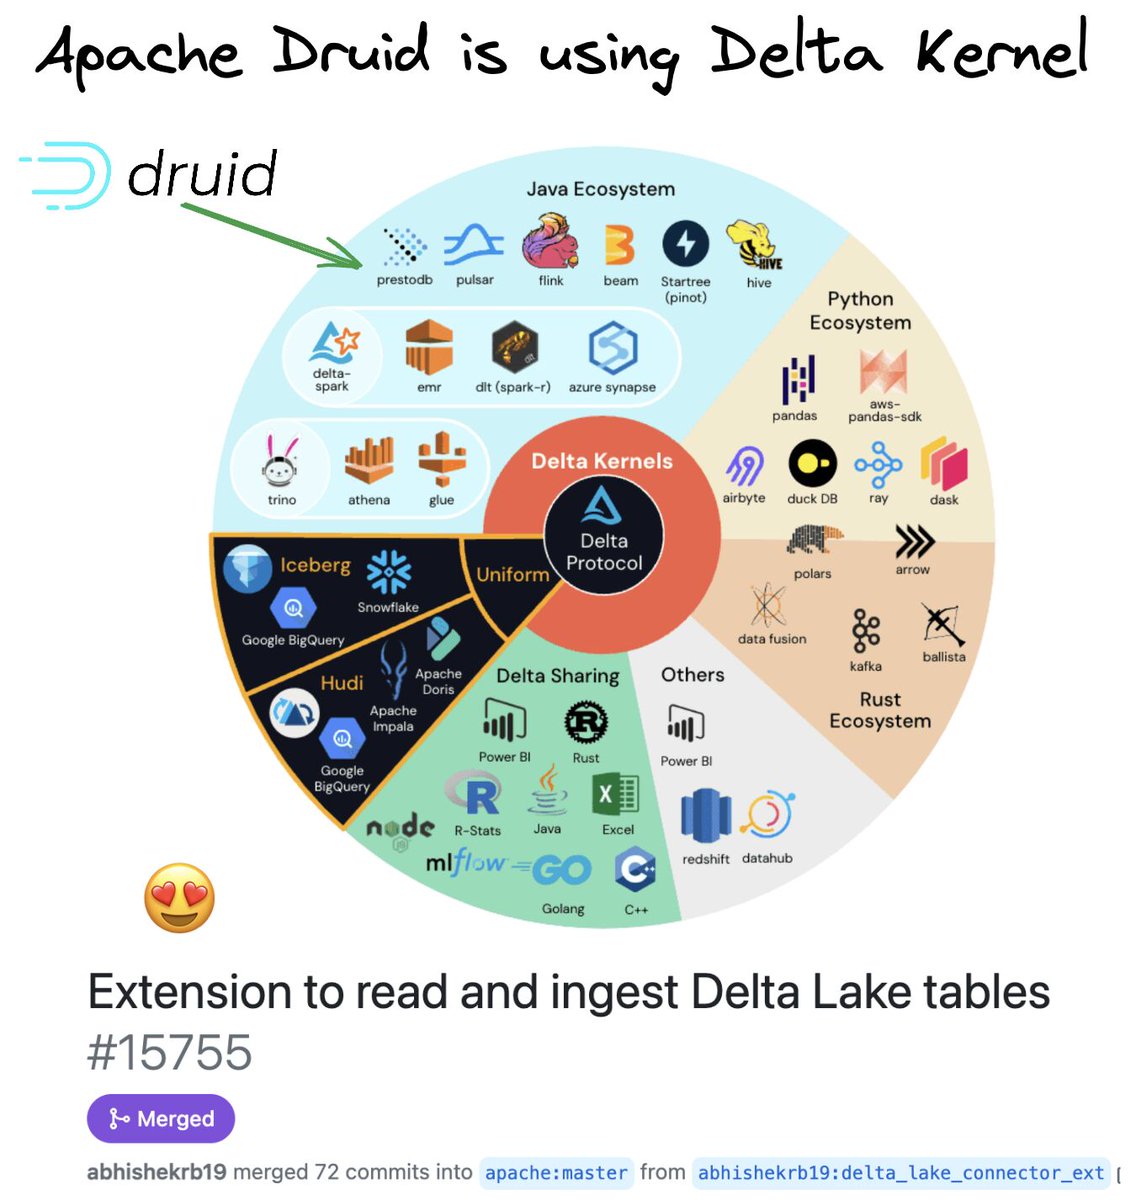 The Apache Druid community just added a Delta Lake connector via Delta Kernel Java.

Delta Kernel is an ambitious project to abstract all the core Delta logic into Java/Rust codebases, so each connector doesn't need to write all Delta processing logic from scratch.

#deltalake